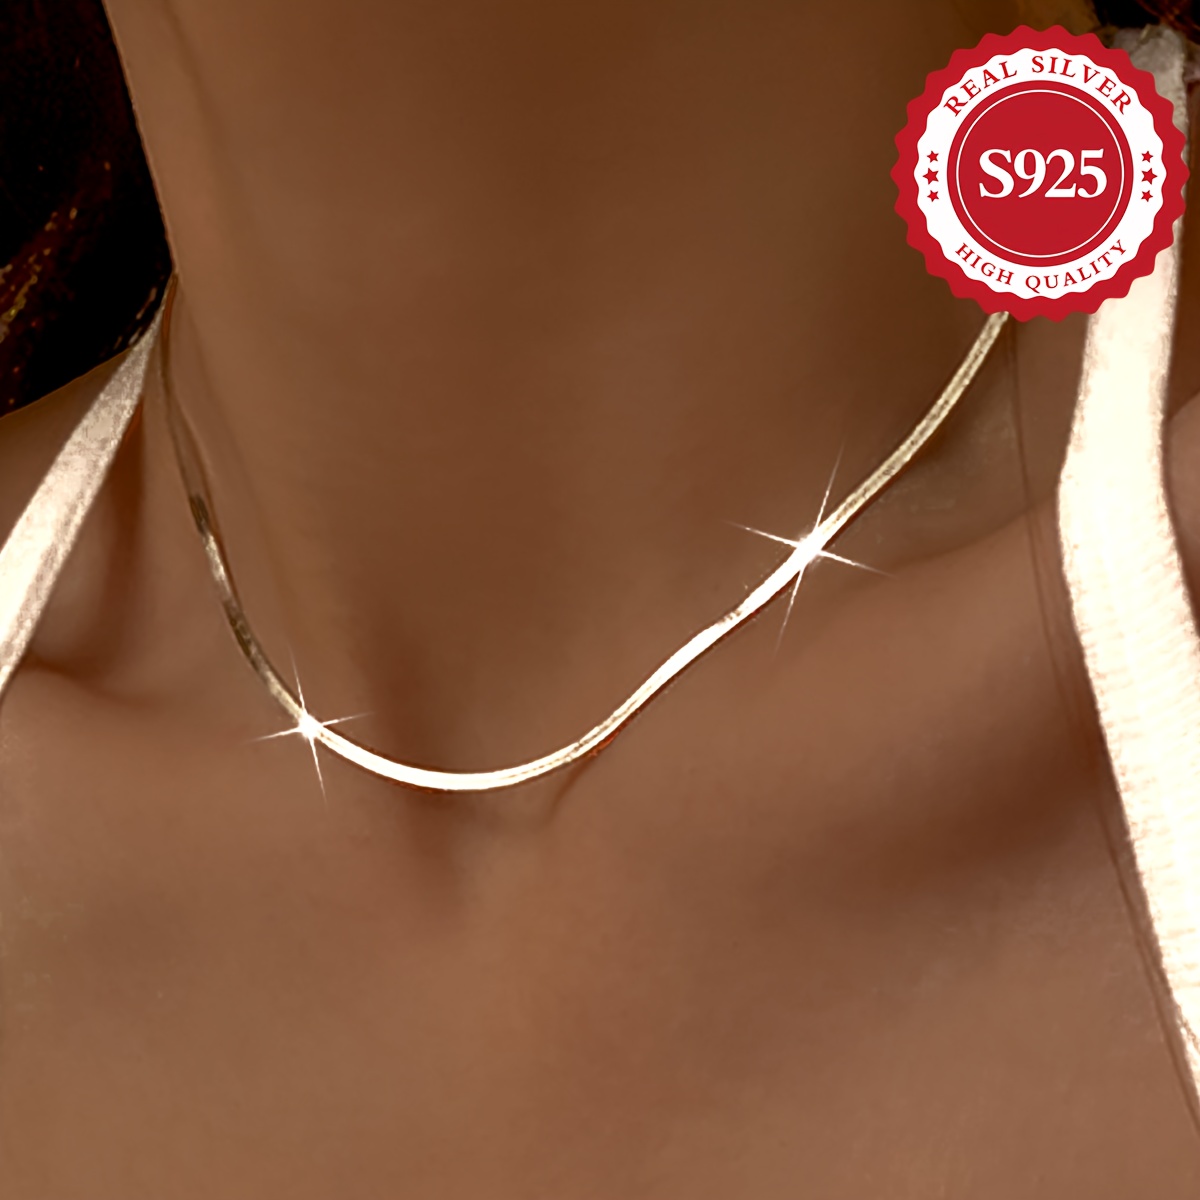 

S925 Sterling Silver Flat Snake Bone Necklace, 18k Gold Plated, Elegant & Luxurious, Hypoallergenic, 4.5g/0.16oz, Fashionable Jewelry Accessory For Women